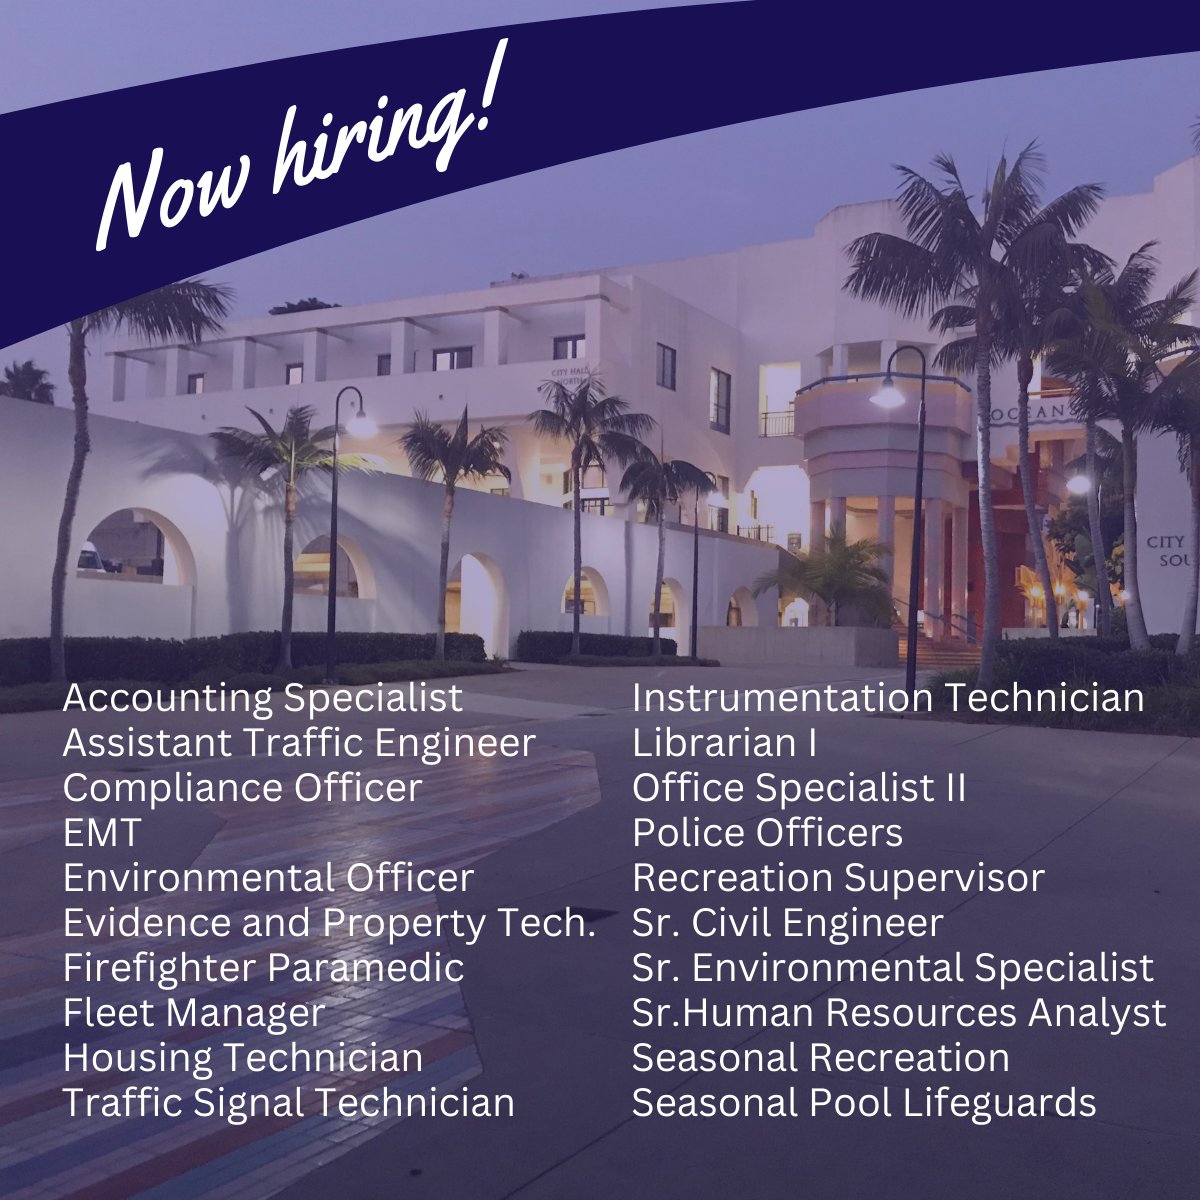 Work with us in #Oceanside!  Plenty of great opportunities await in a variety of areas to help serve our beautiful city: bit.ly/Oceanside-Open…

#Workwithus #publicservice #LocalGovernment